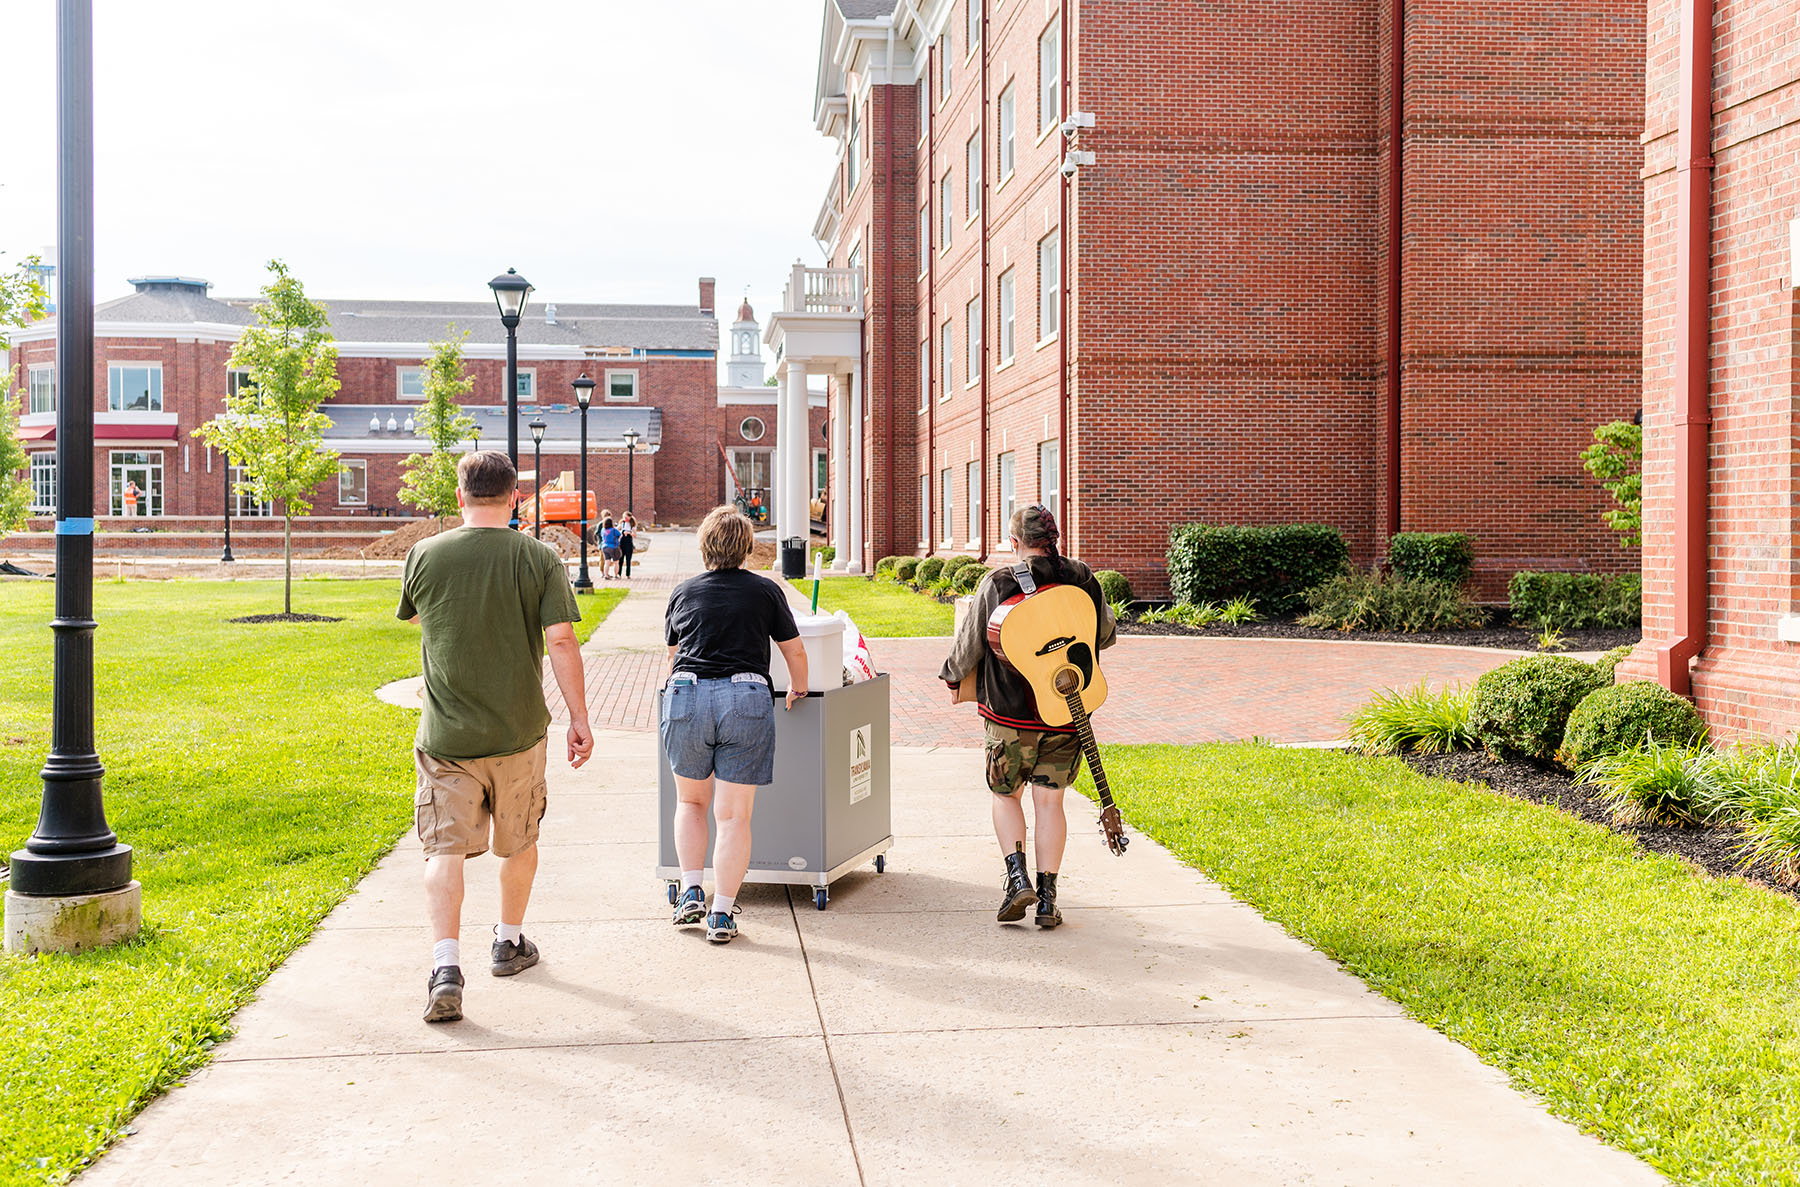 Transylvania welcomes Class of 2025 with annual Move-In Day, induction ceremony